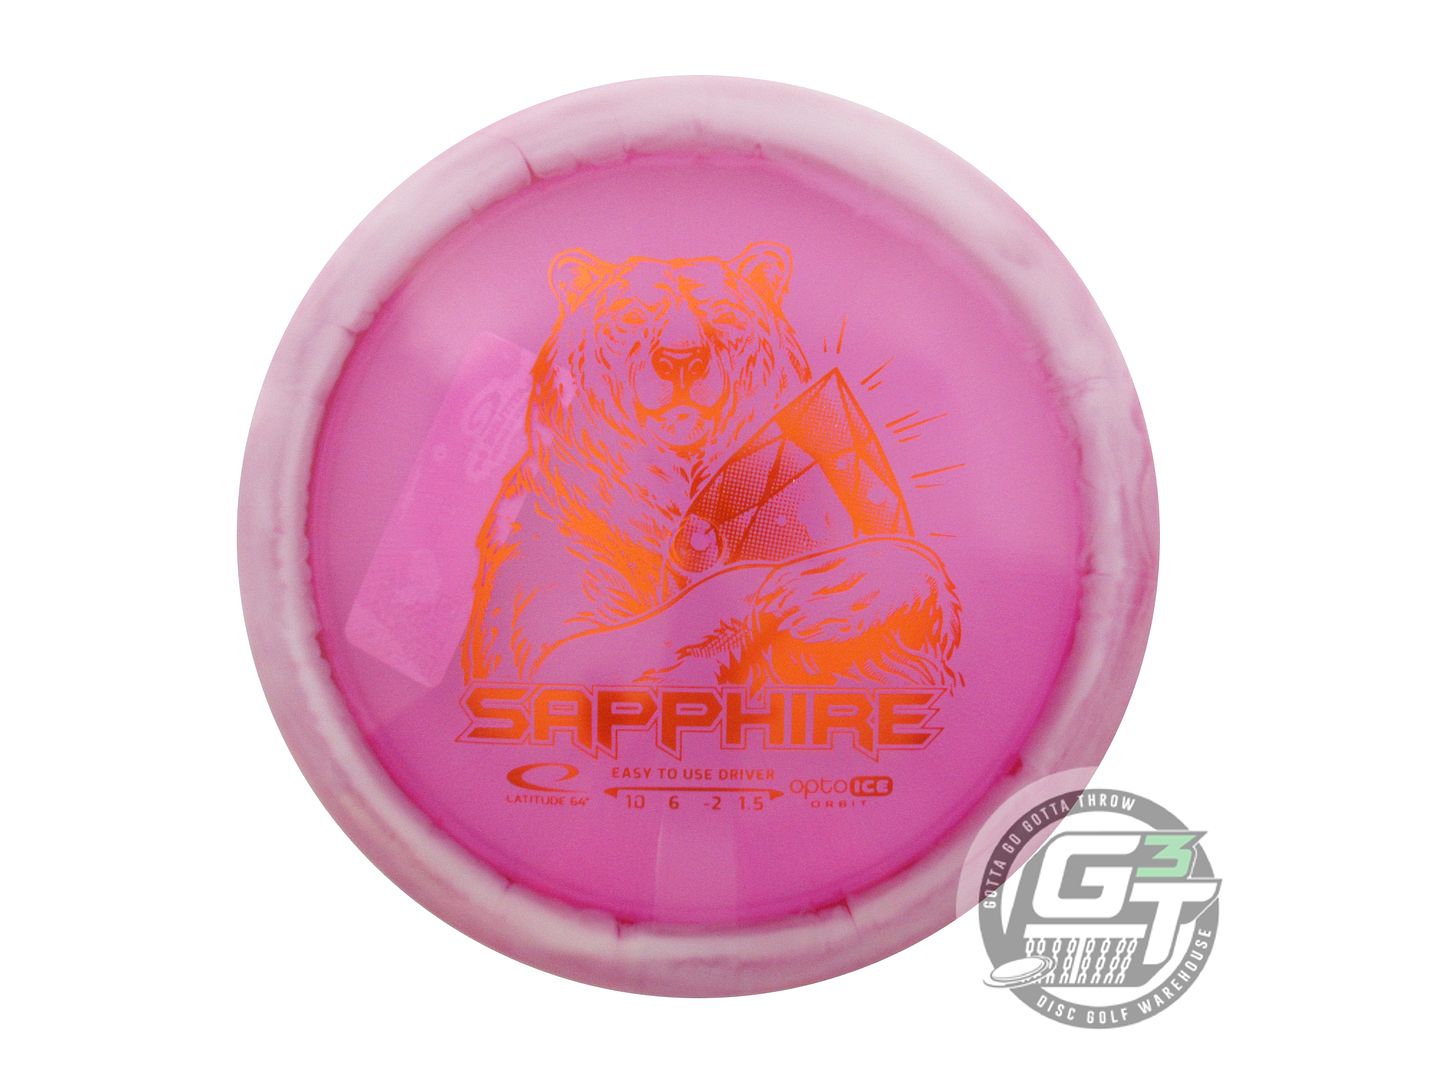 Latitude 64 Opto Ice Orbit Sapphire Distance Driver Golf Disc (Individually Listed)